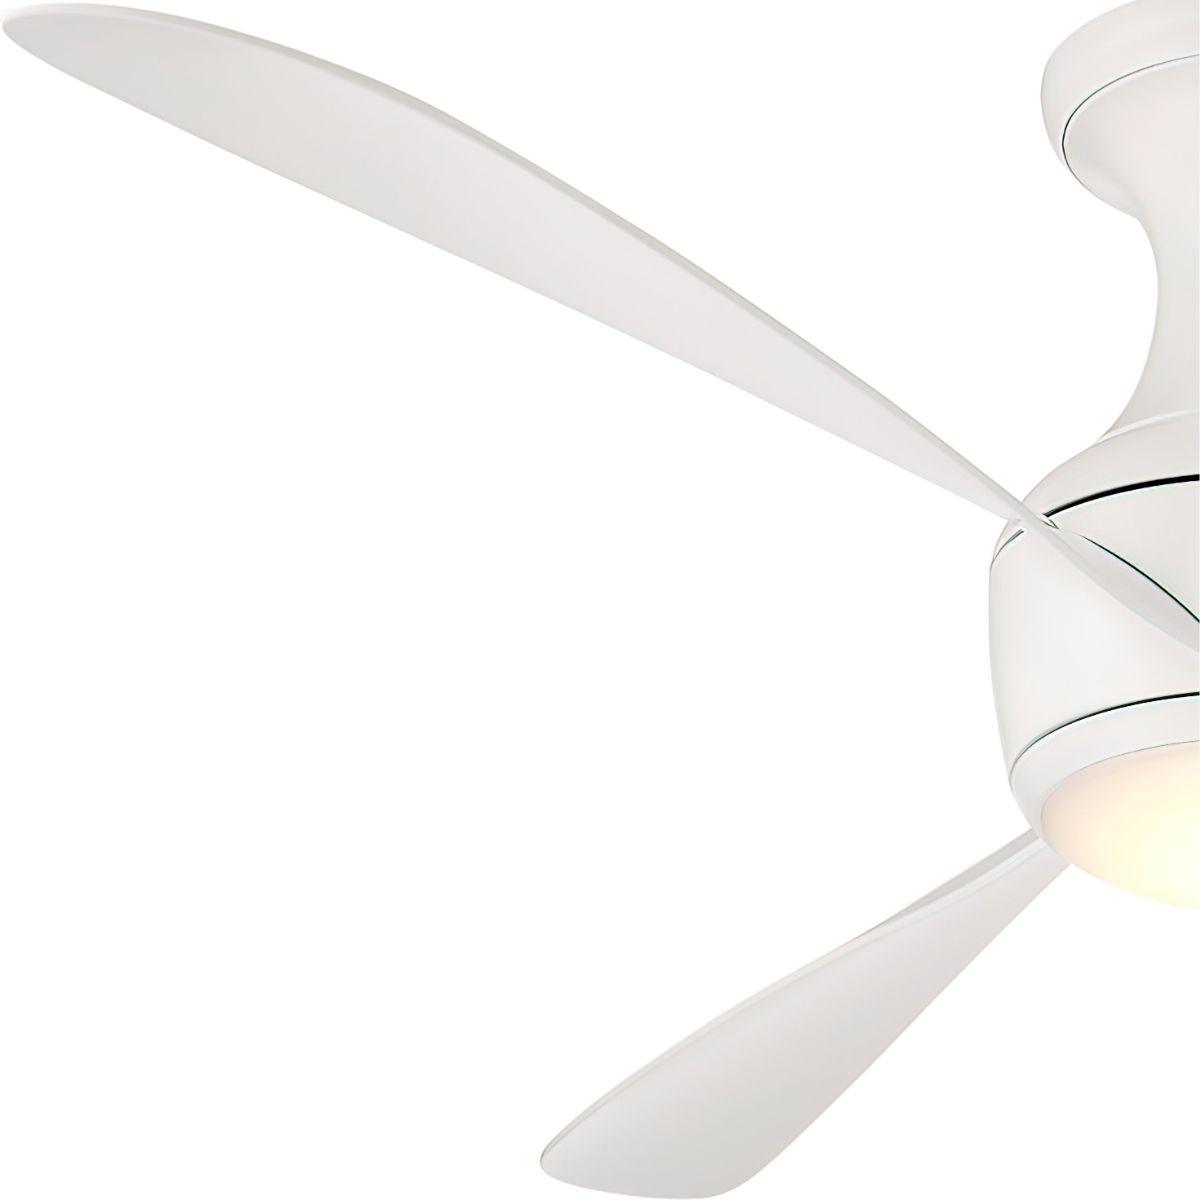 Corona 52 Inch Modern Outdoor Smart Ceiling Fan With 2700K LED And Remote